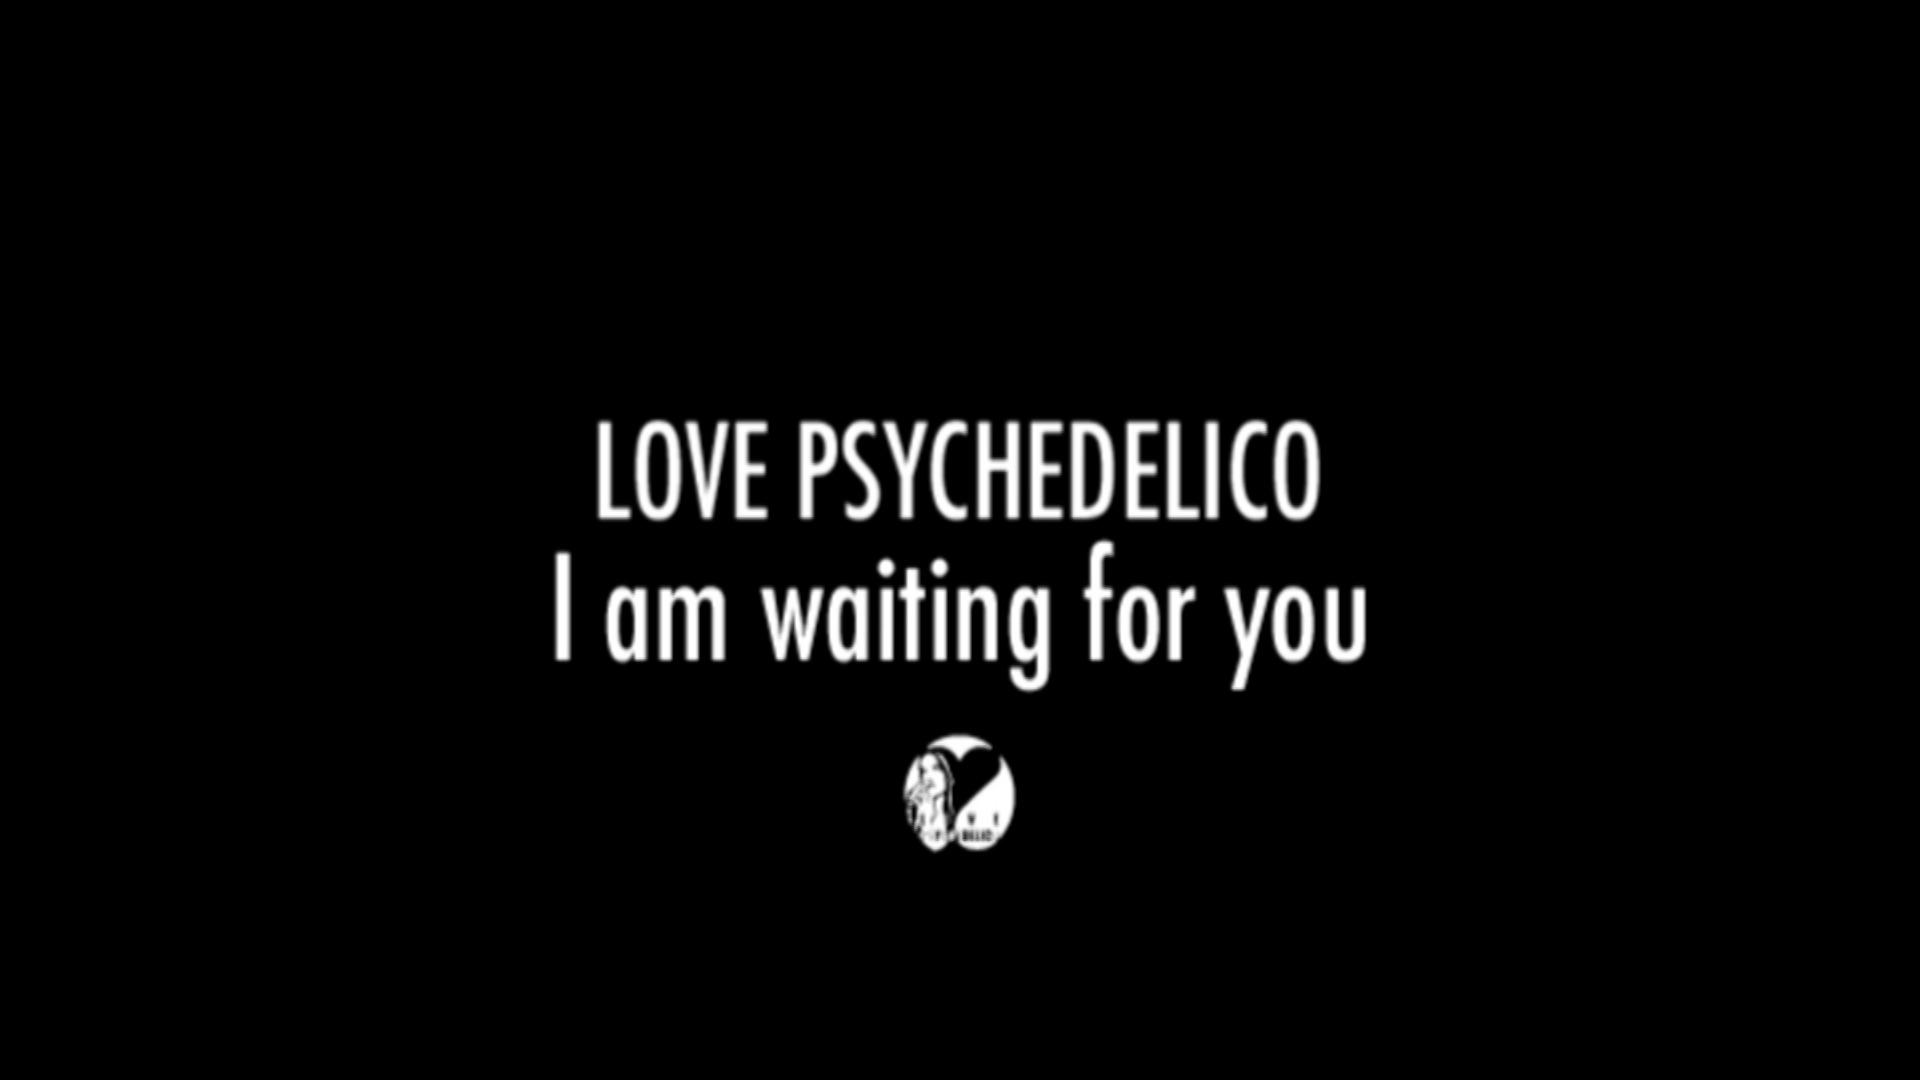 Music　I　PSYCHEDELICOのミュージックビデオ　For　You　Am　Apple　Waiting　LOVE